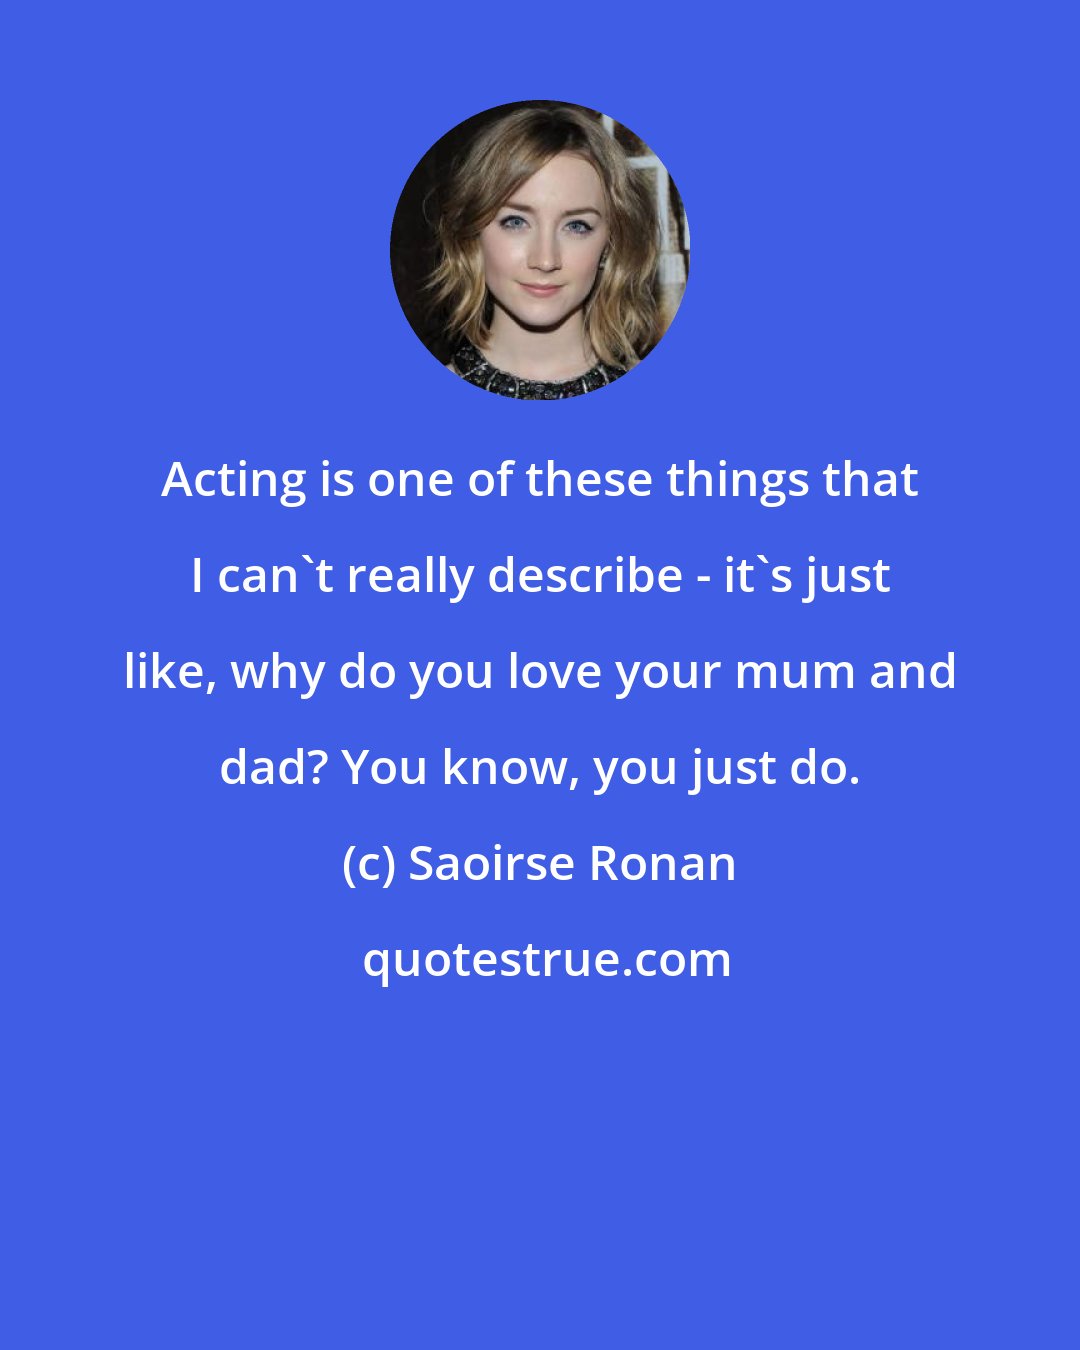 Saoirse Ronan: Acting is one of these things that I can't really describe - it's just like, why do you love your mum and dad? You know, you just do.